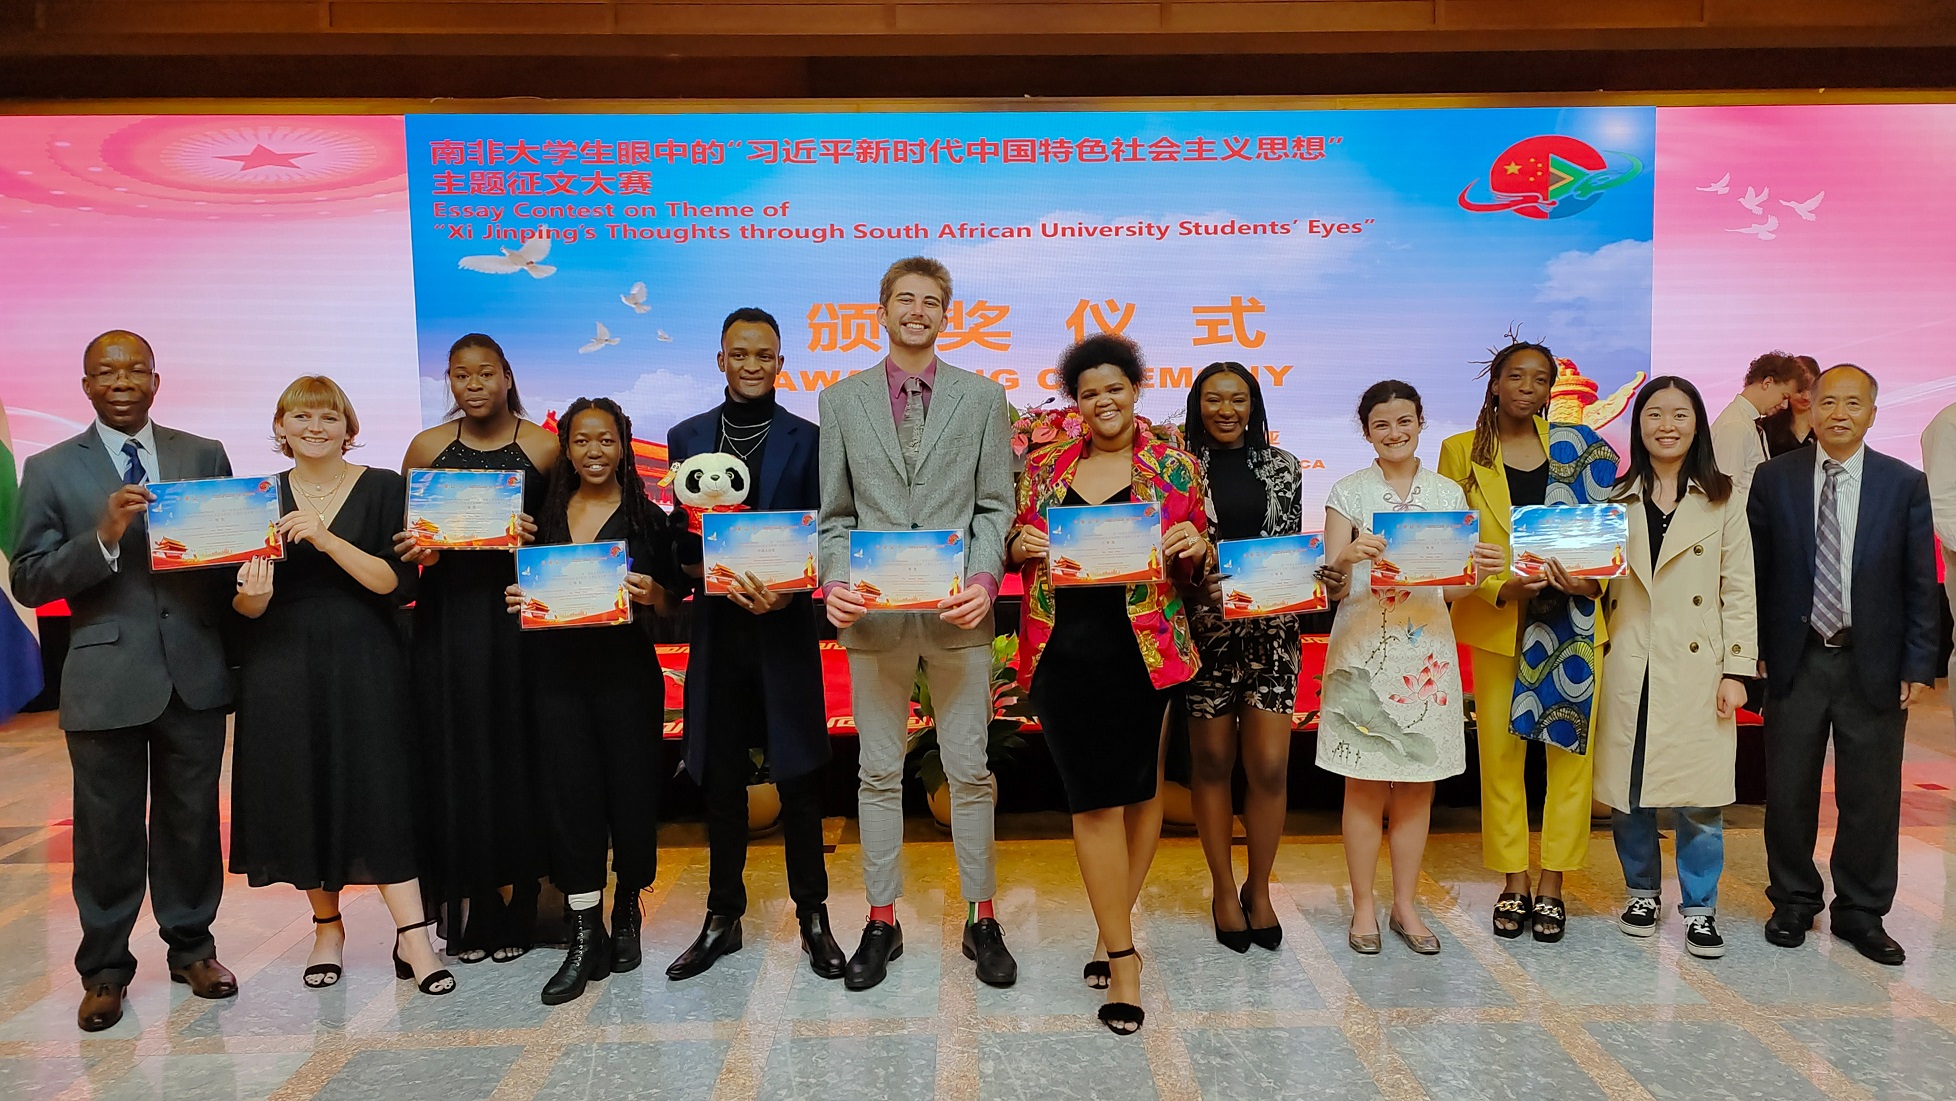 The Awards Ceremony at the Chinese Embassy